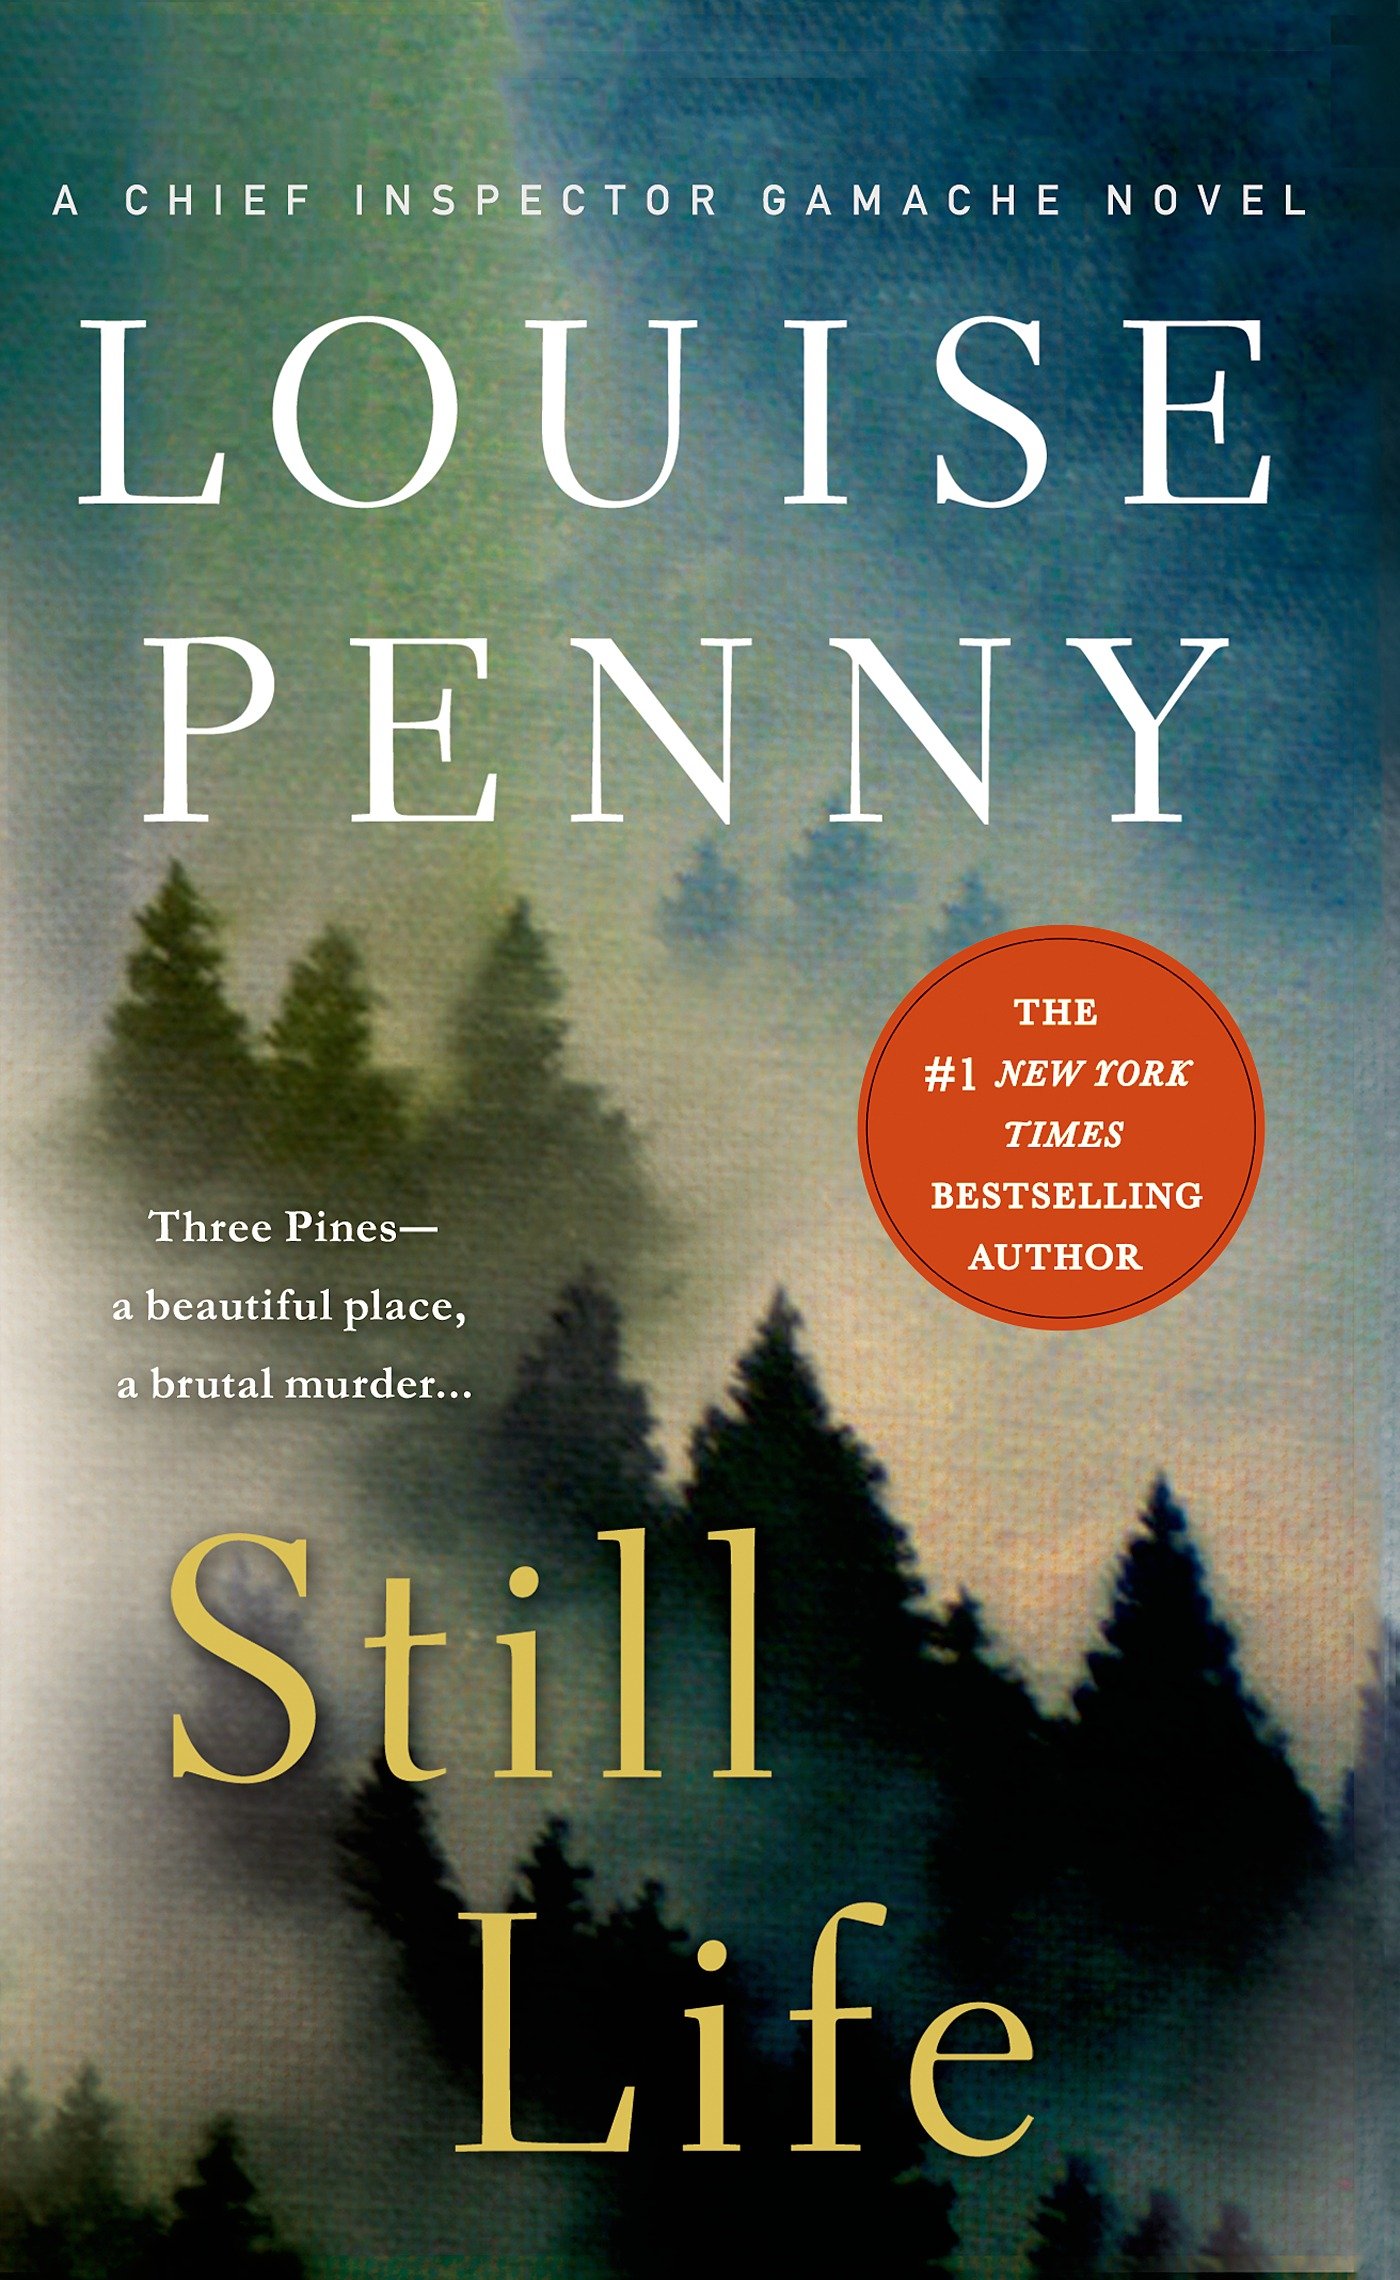 Louise penny books newest first